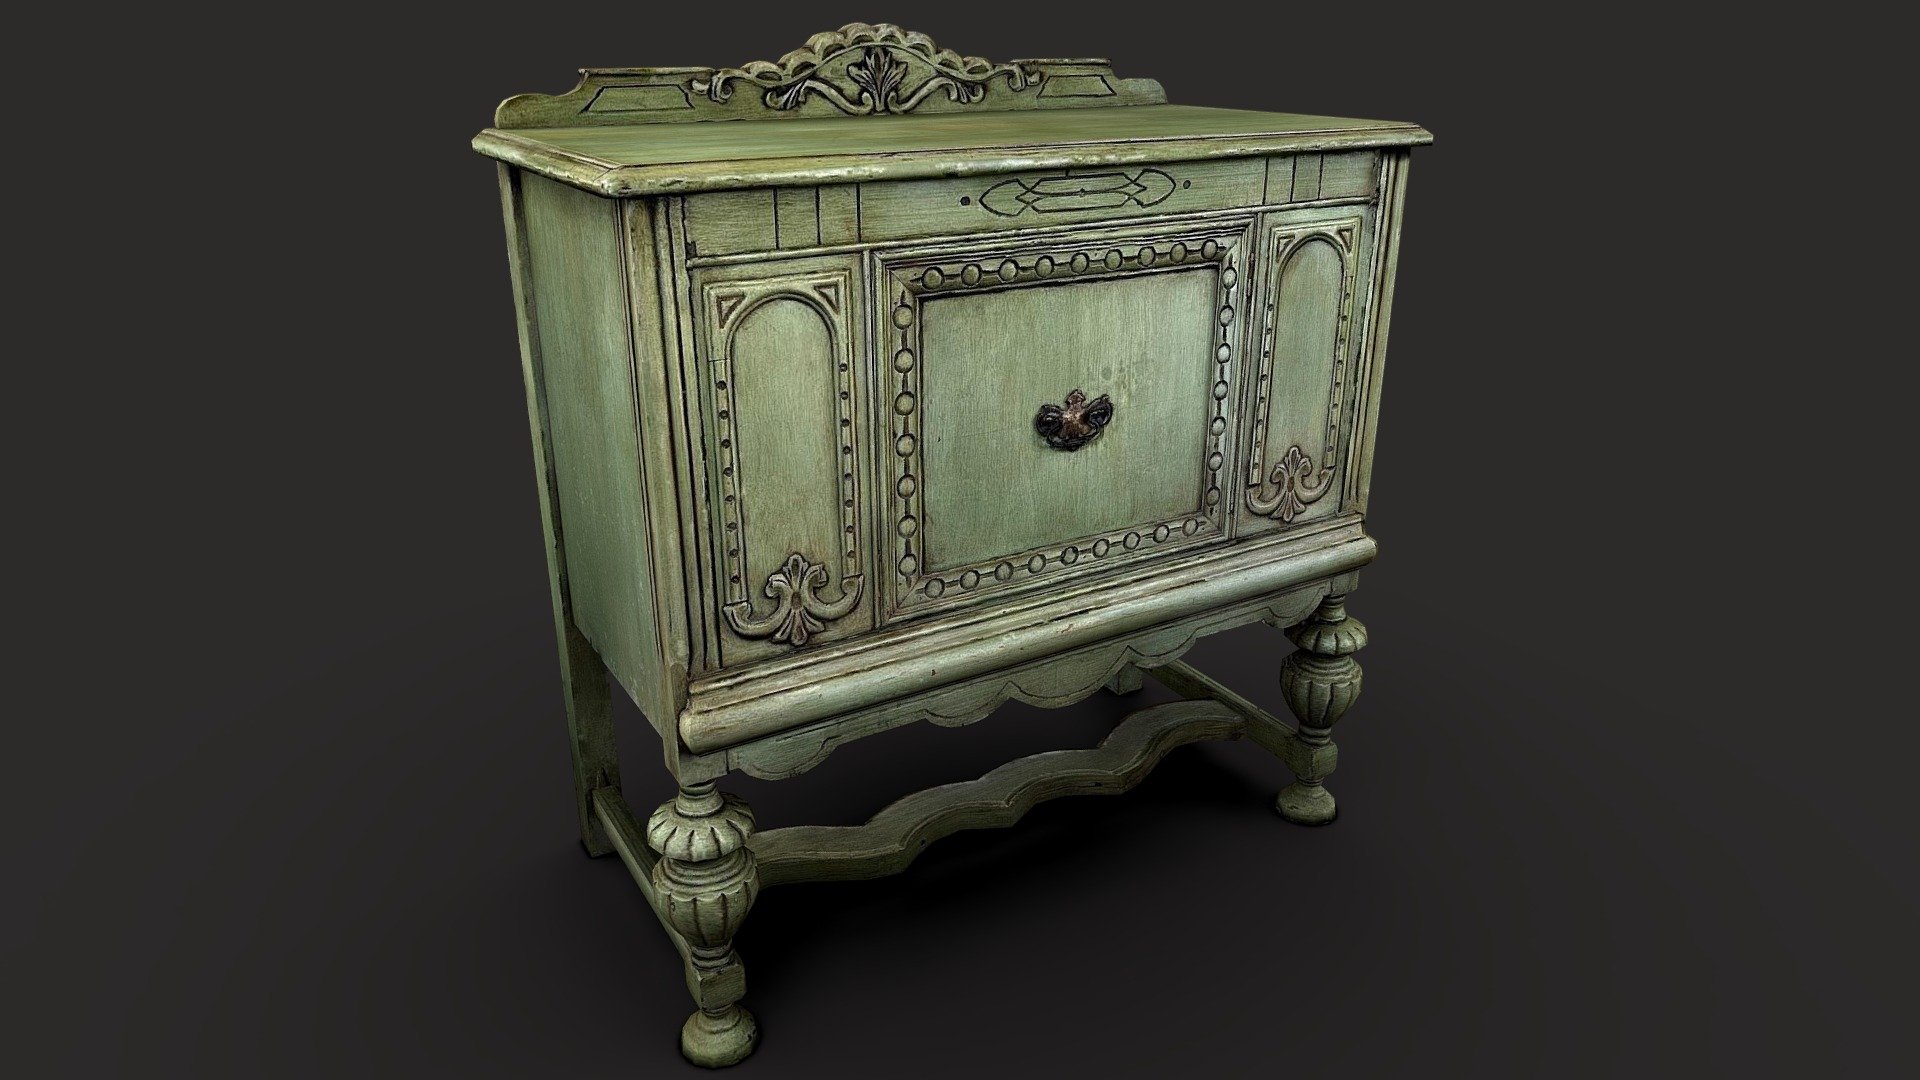 Low poly Remake of &ldquo;Green Cabinet